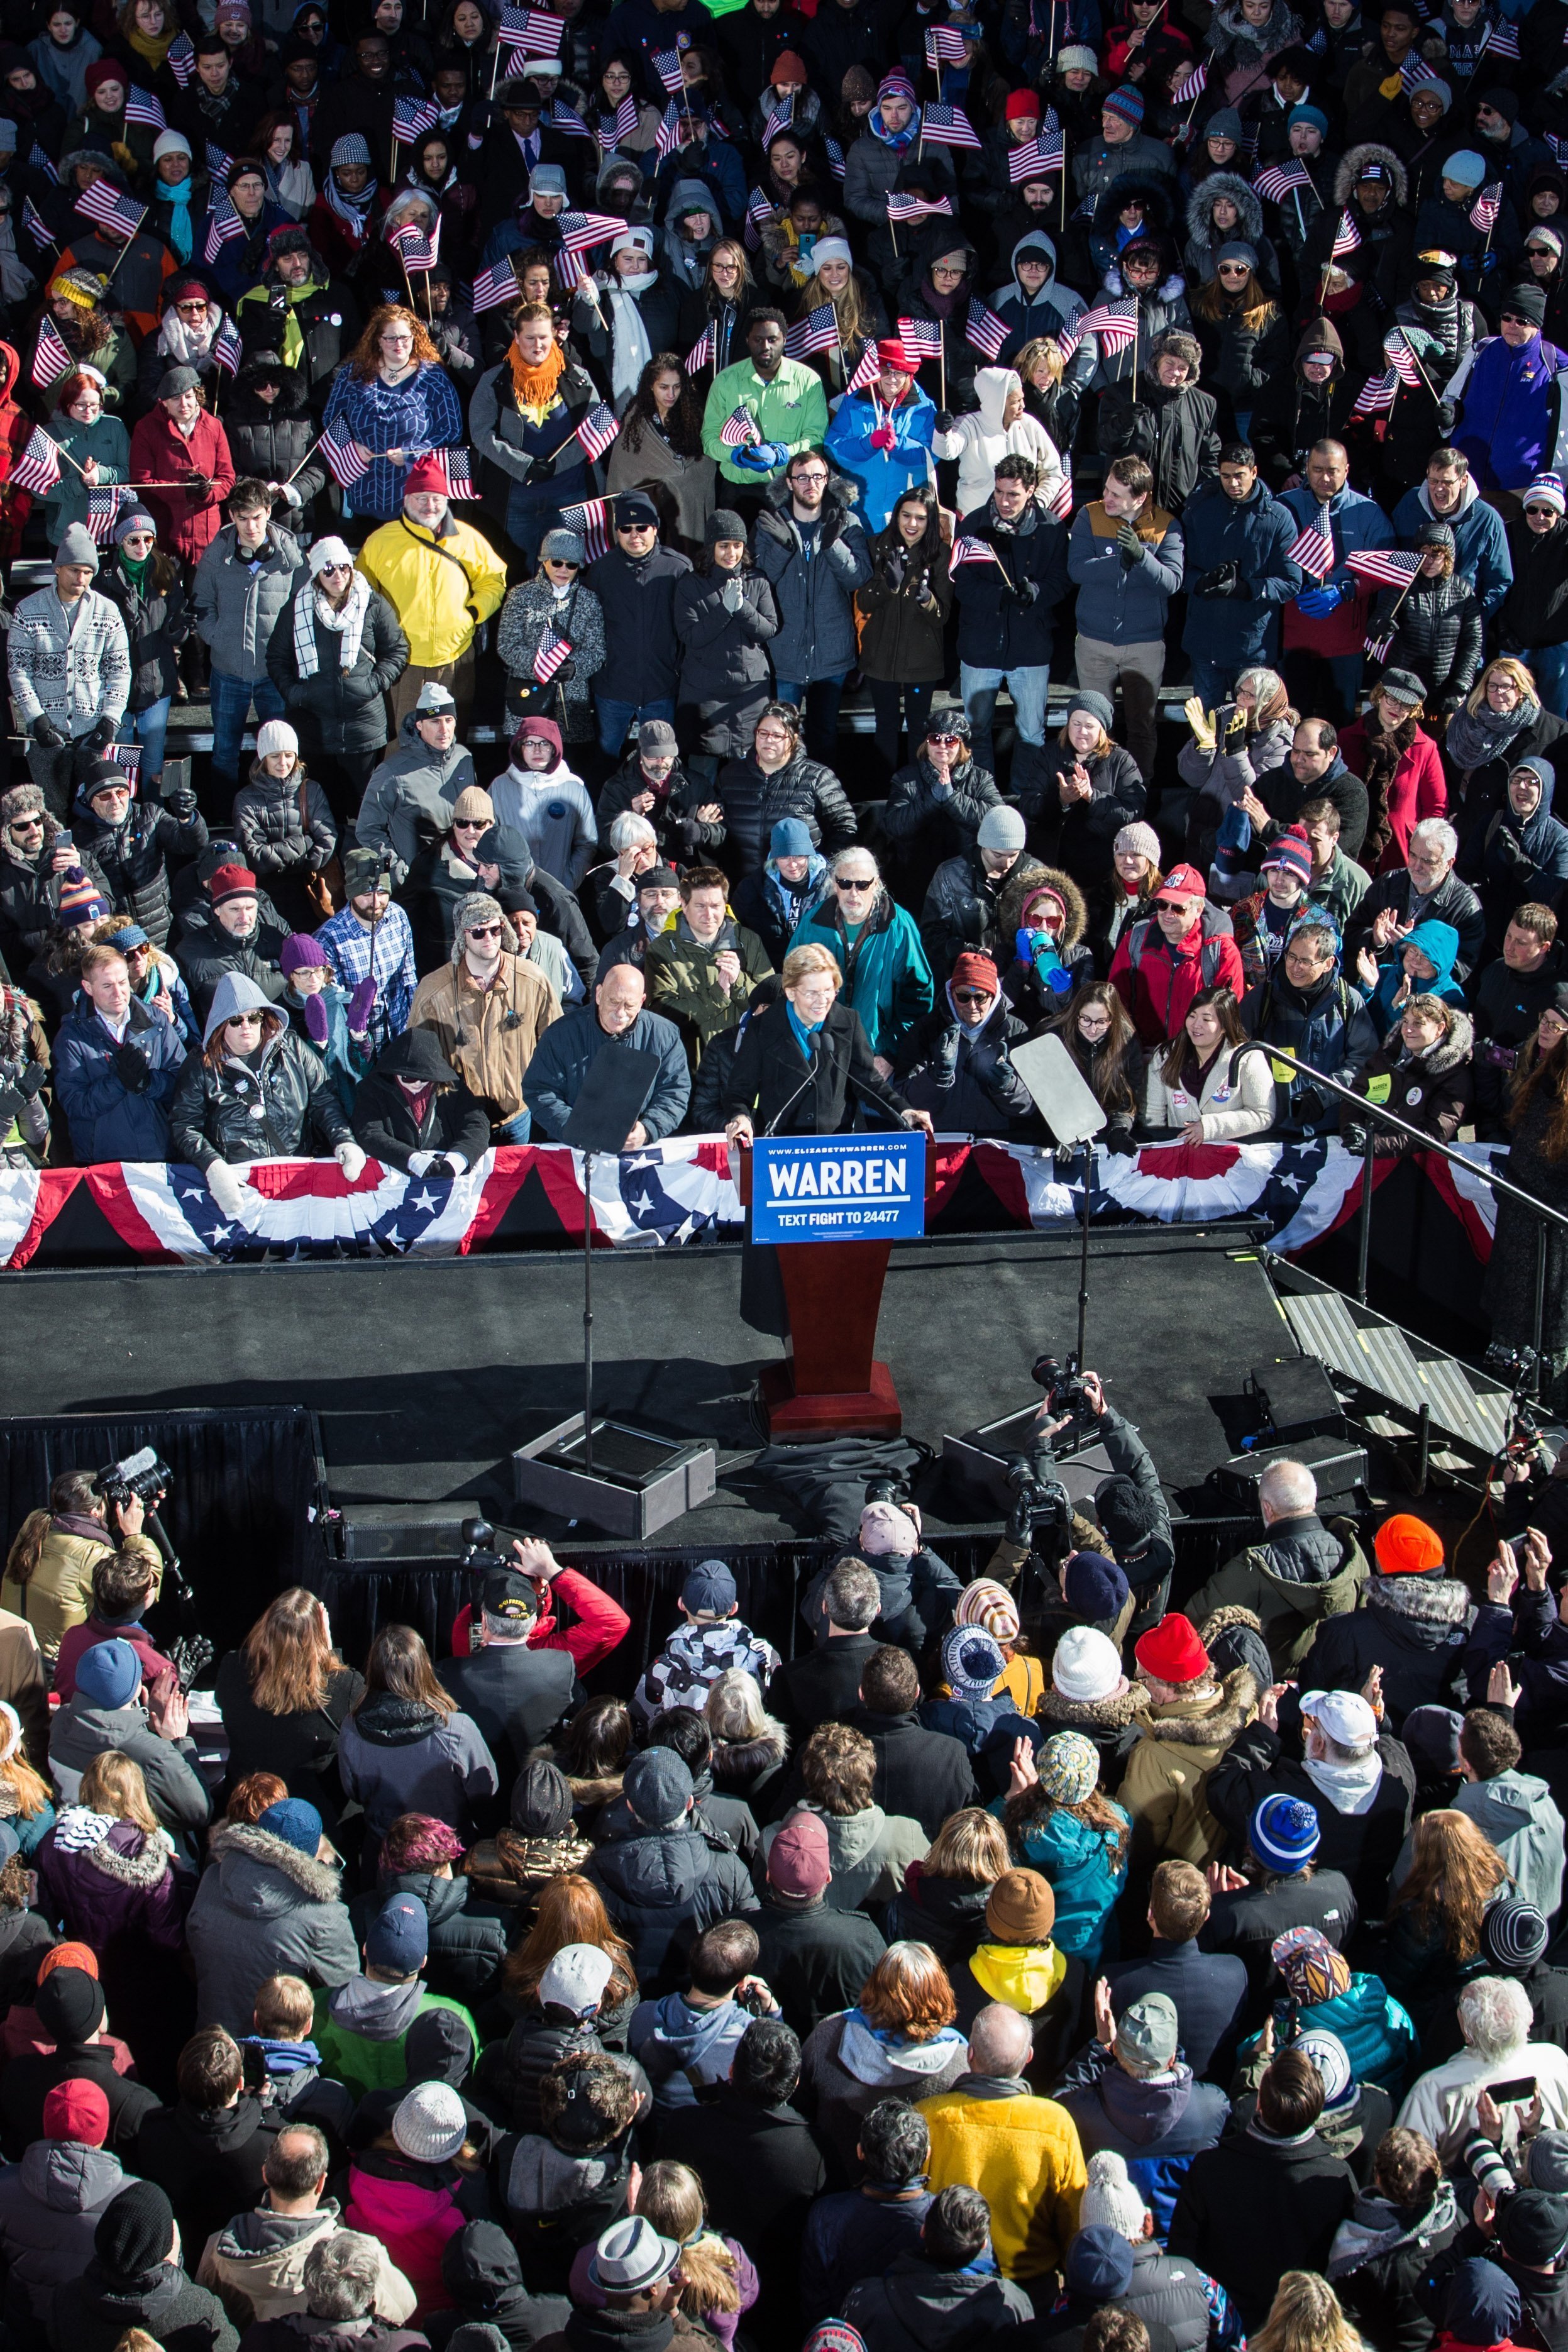 Elizabeth Warren speaking in from of thousands of supporters in Lawrence | Photo: Getty Images